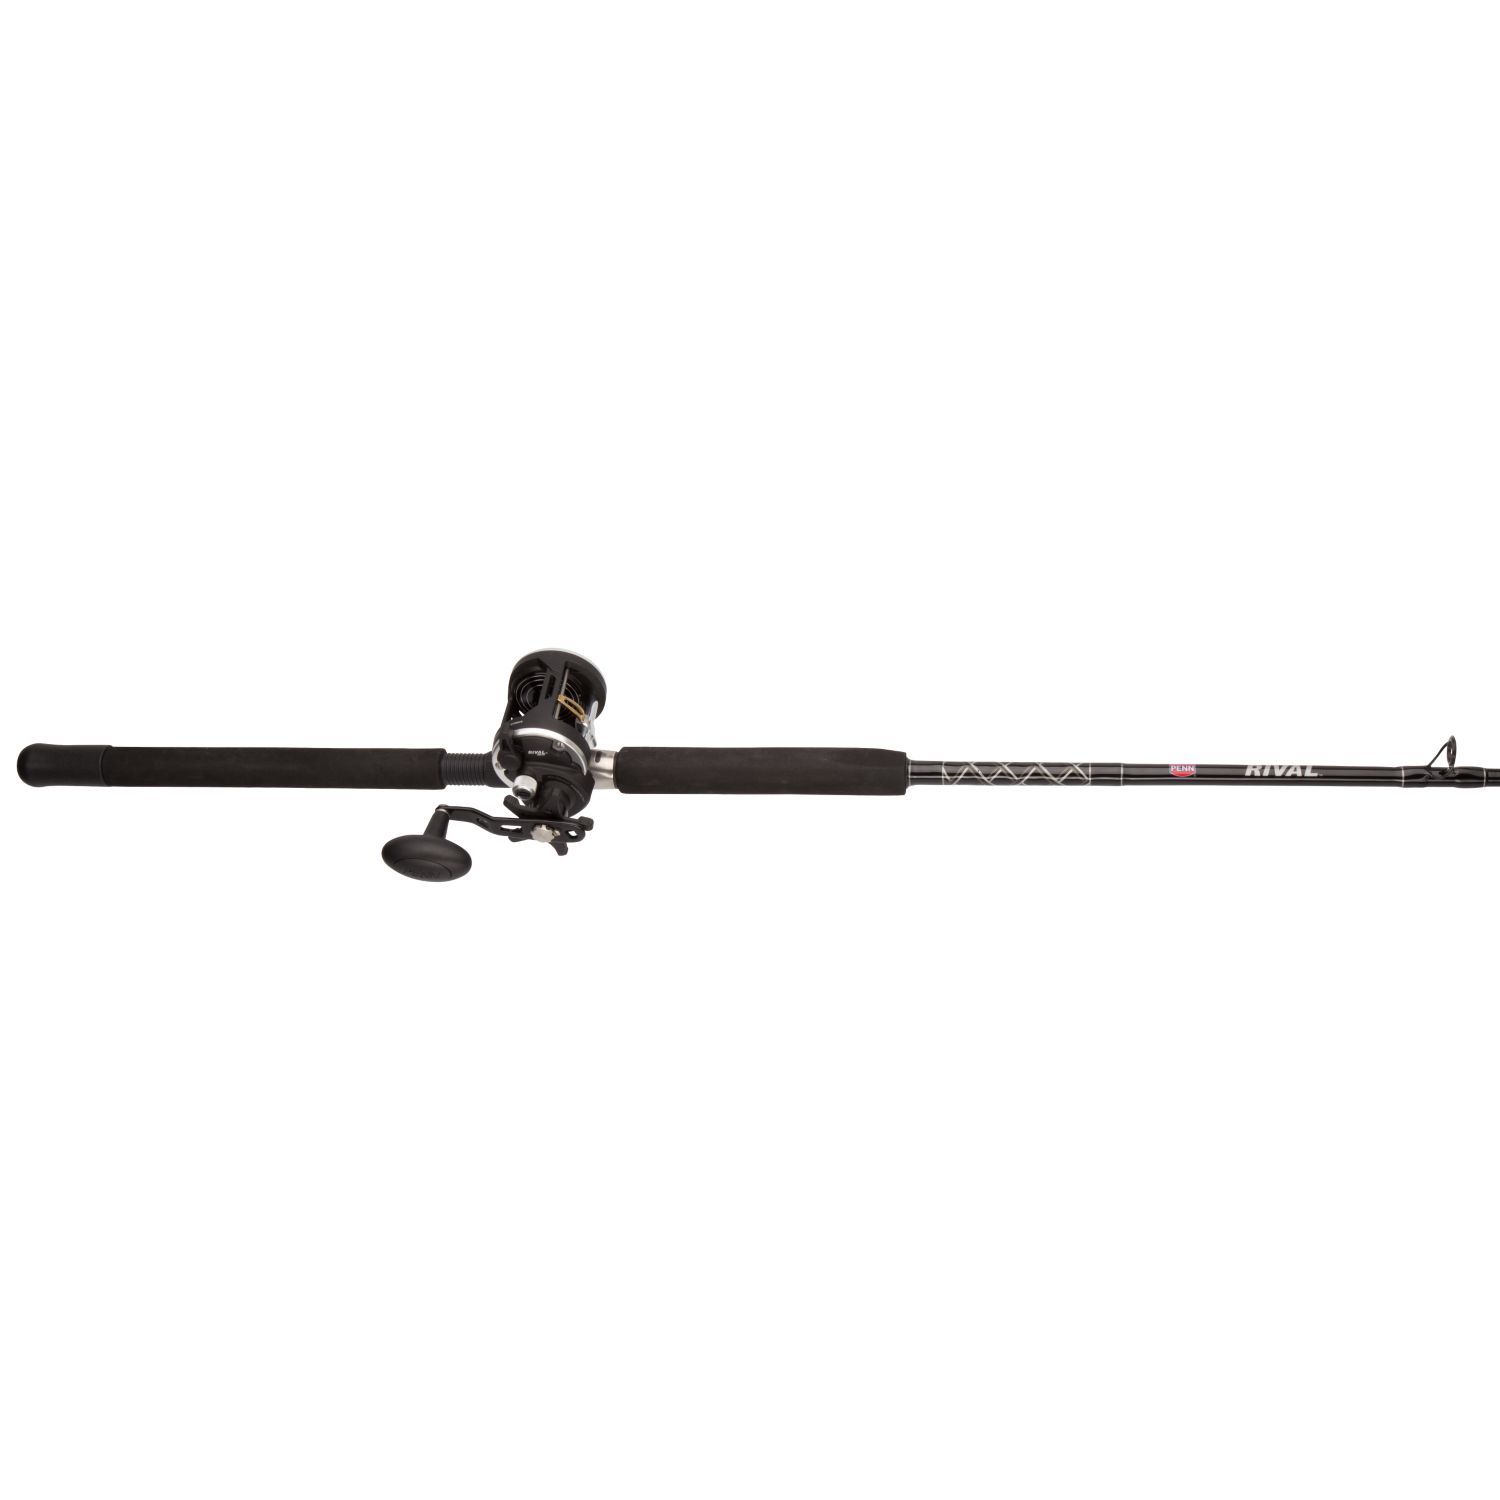 PENN 6'6 Rival™ Levelwind Conventional Combo, Size 20 Reel